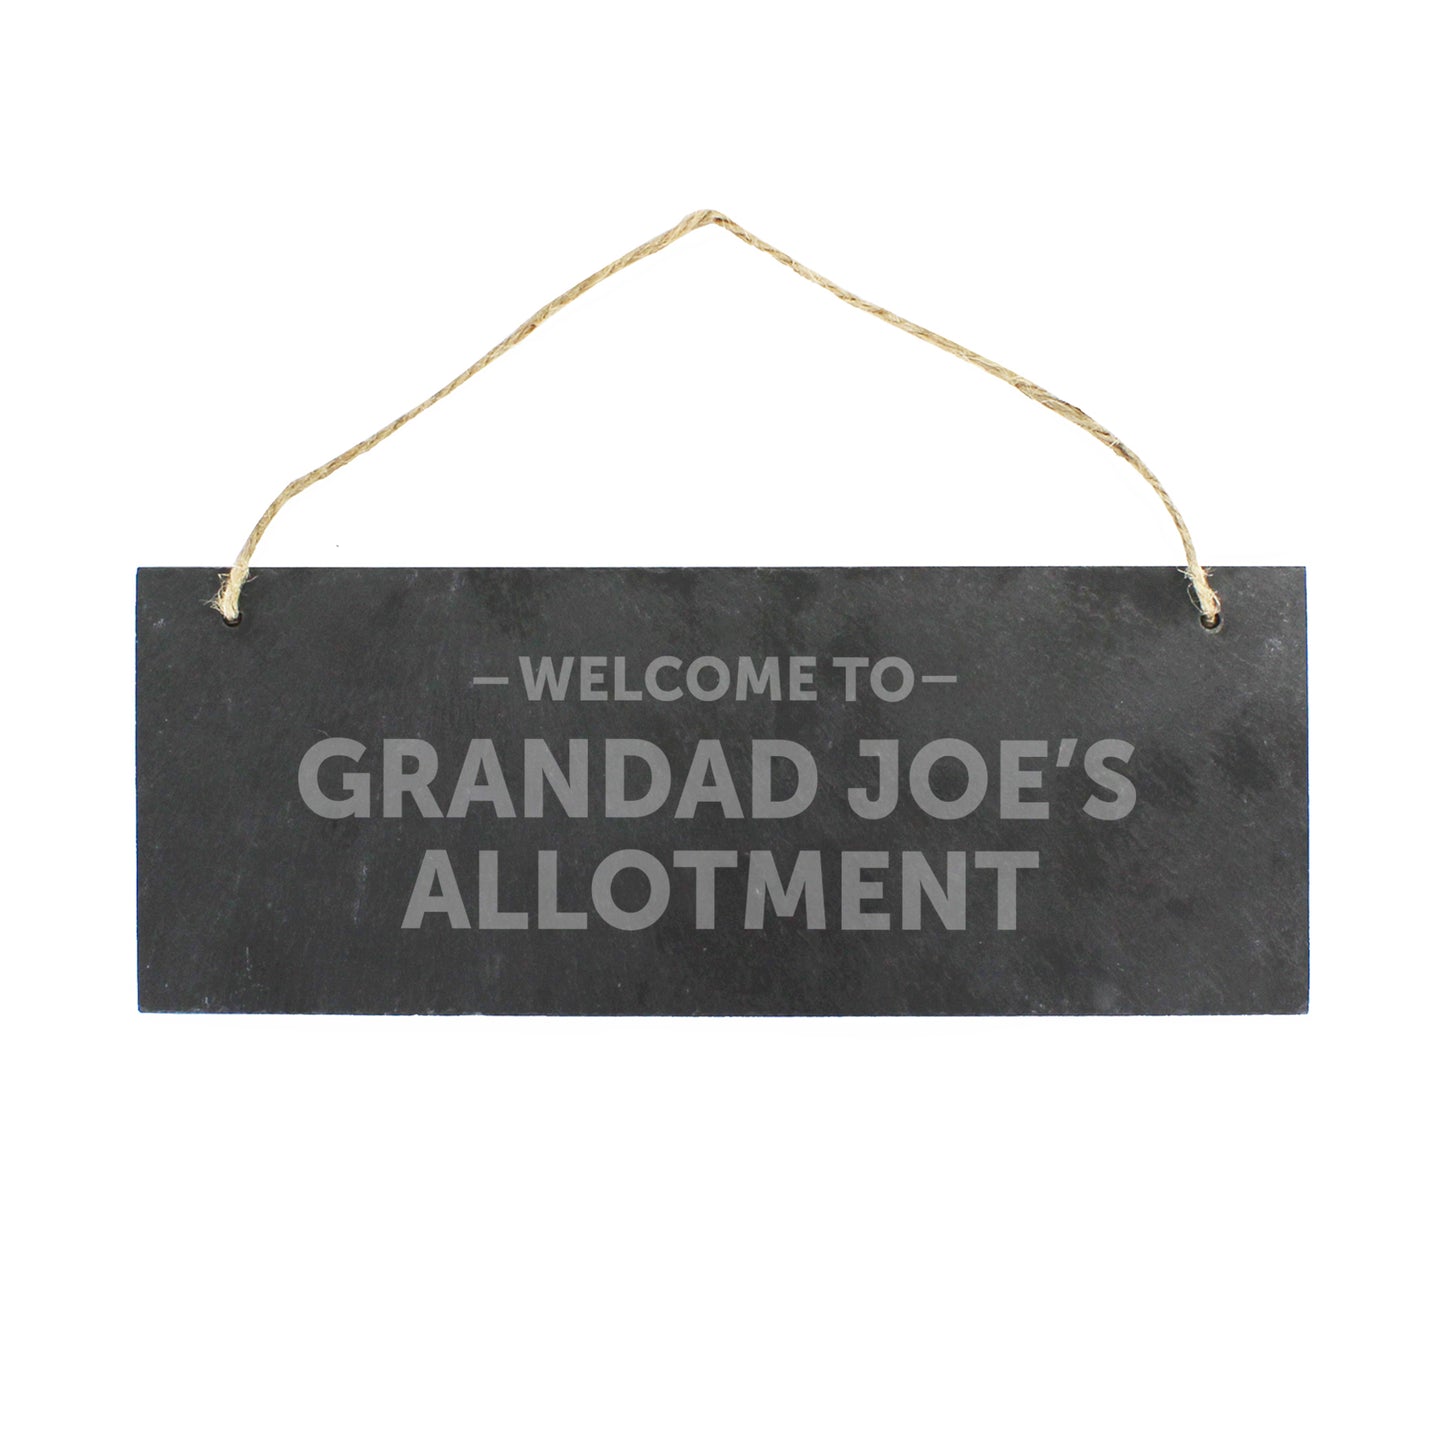 Personalised Welcome To... Hanging Slate Plaque - Personalise It!